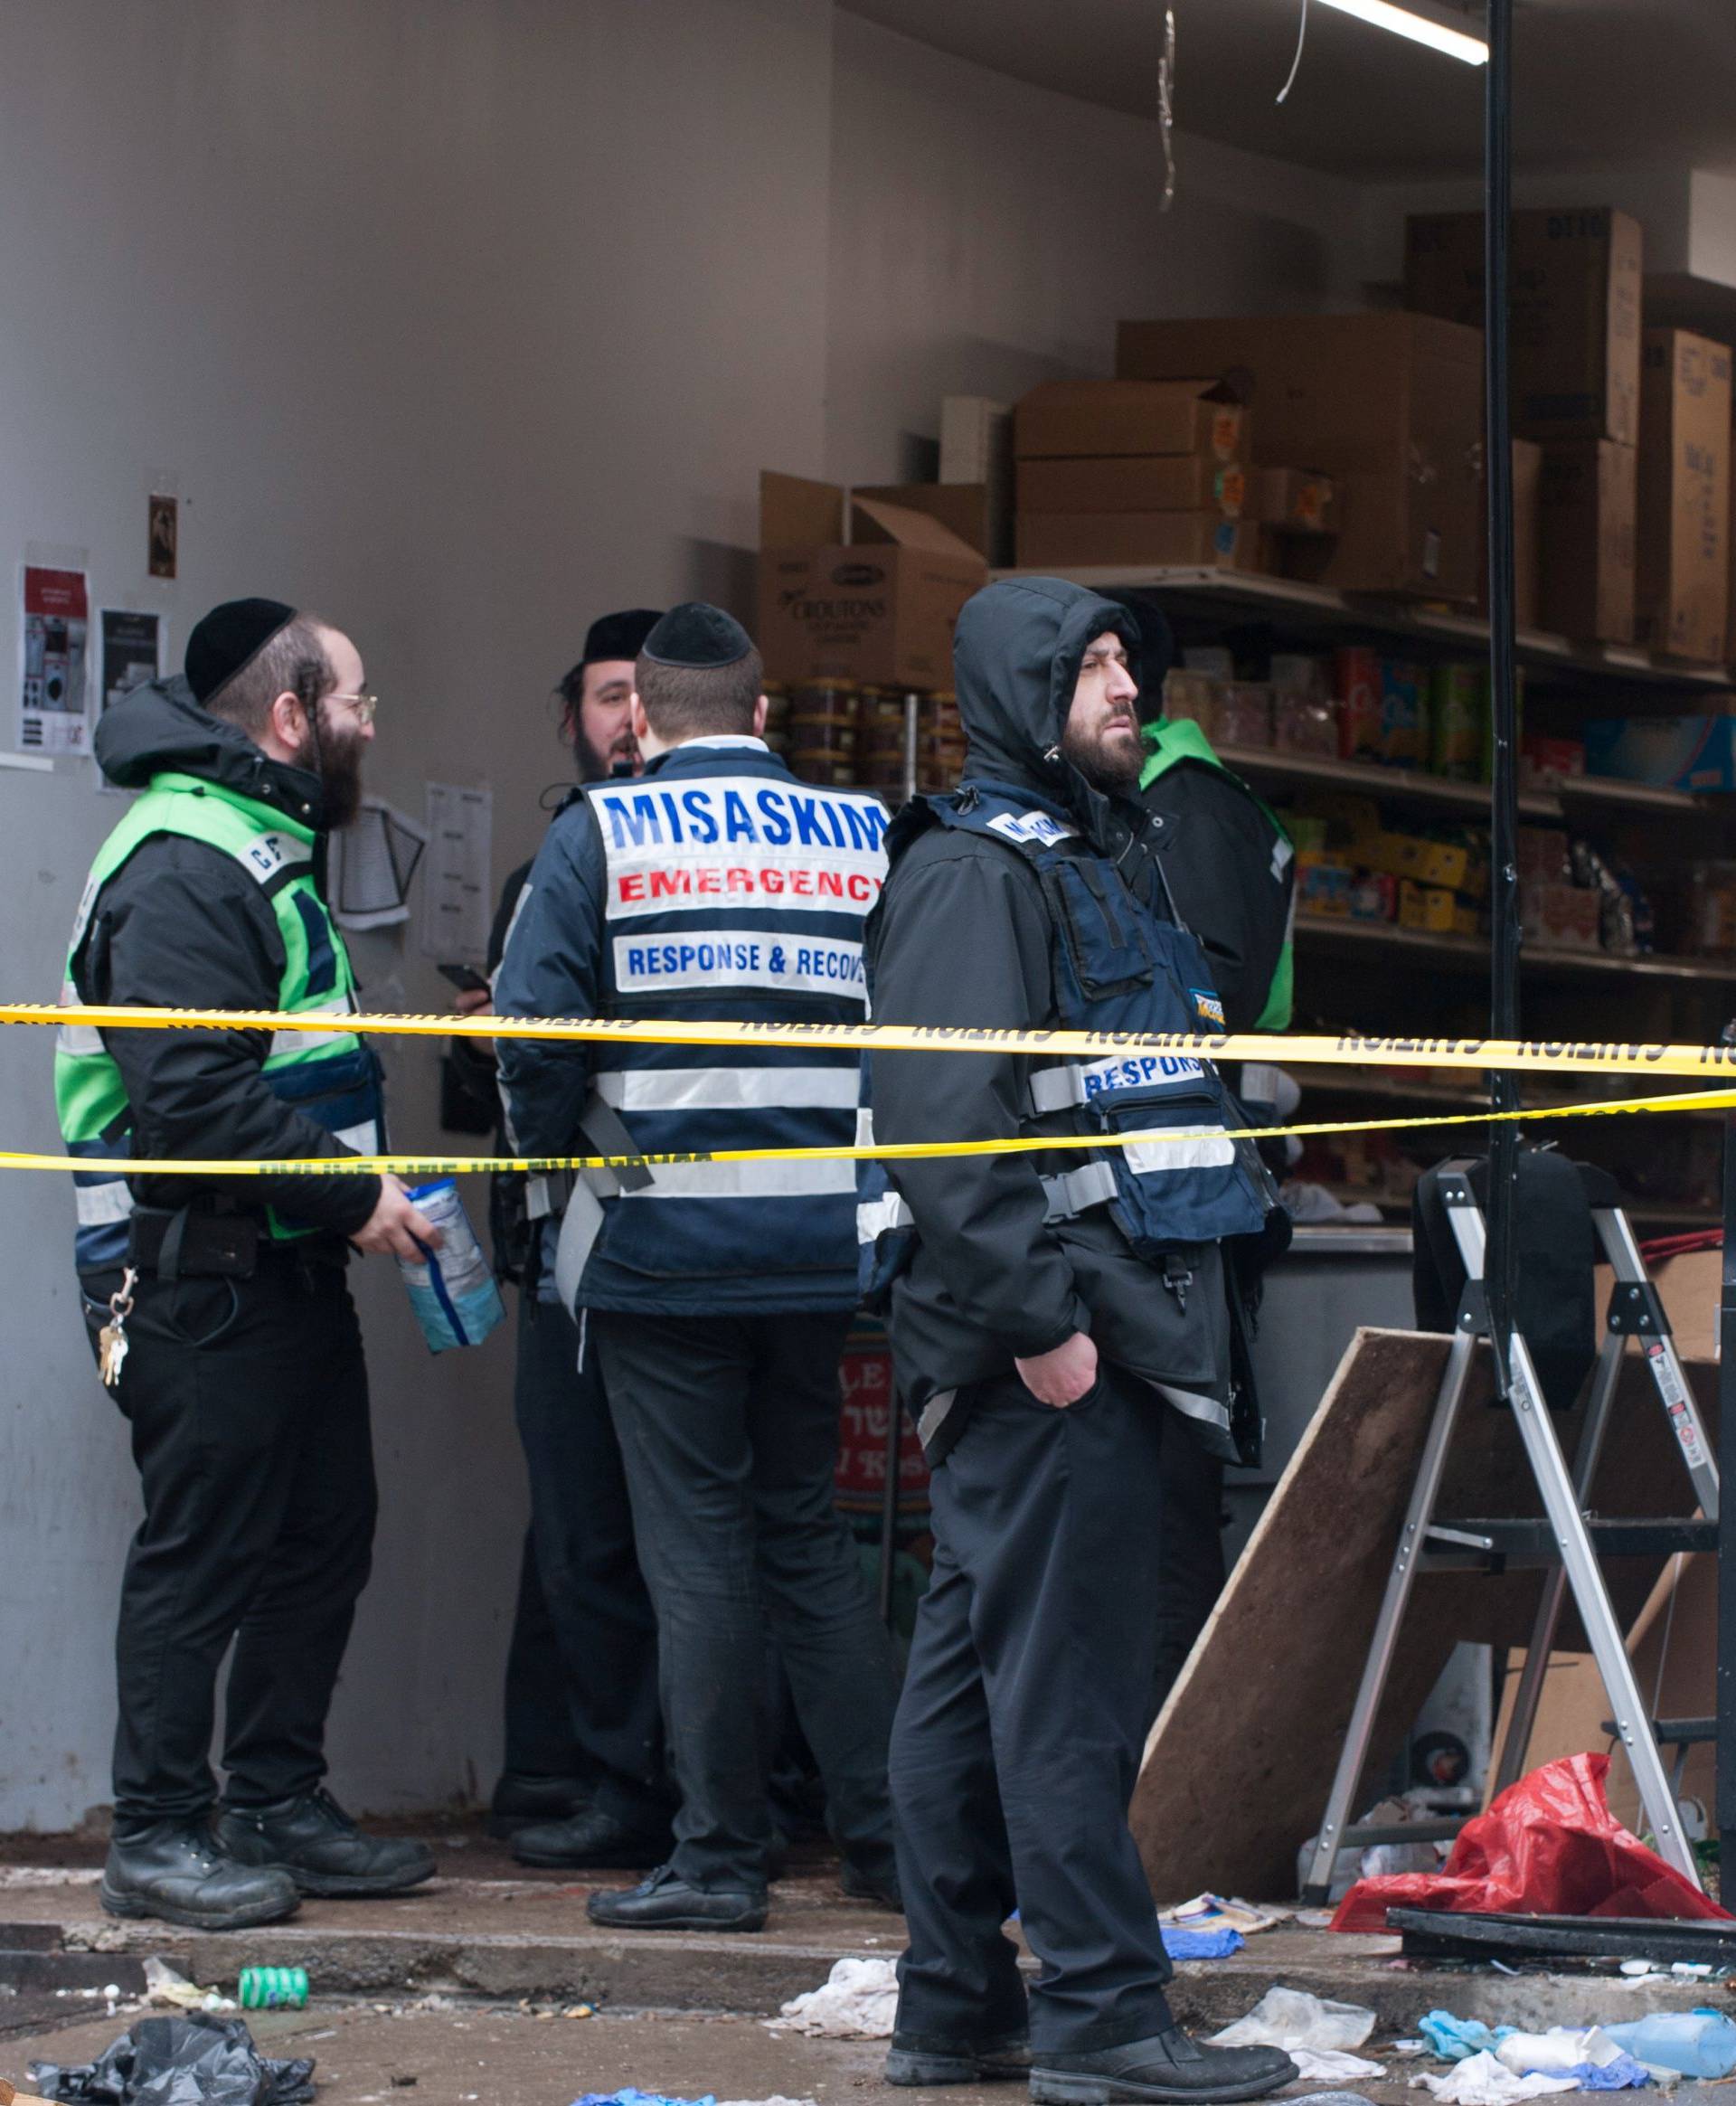 Emergency personnel and investigators work at the scene the day after an hours-long gun battle with two men around a kosher market in Jersey City, New Jersey